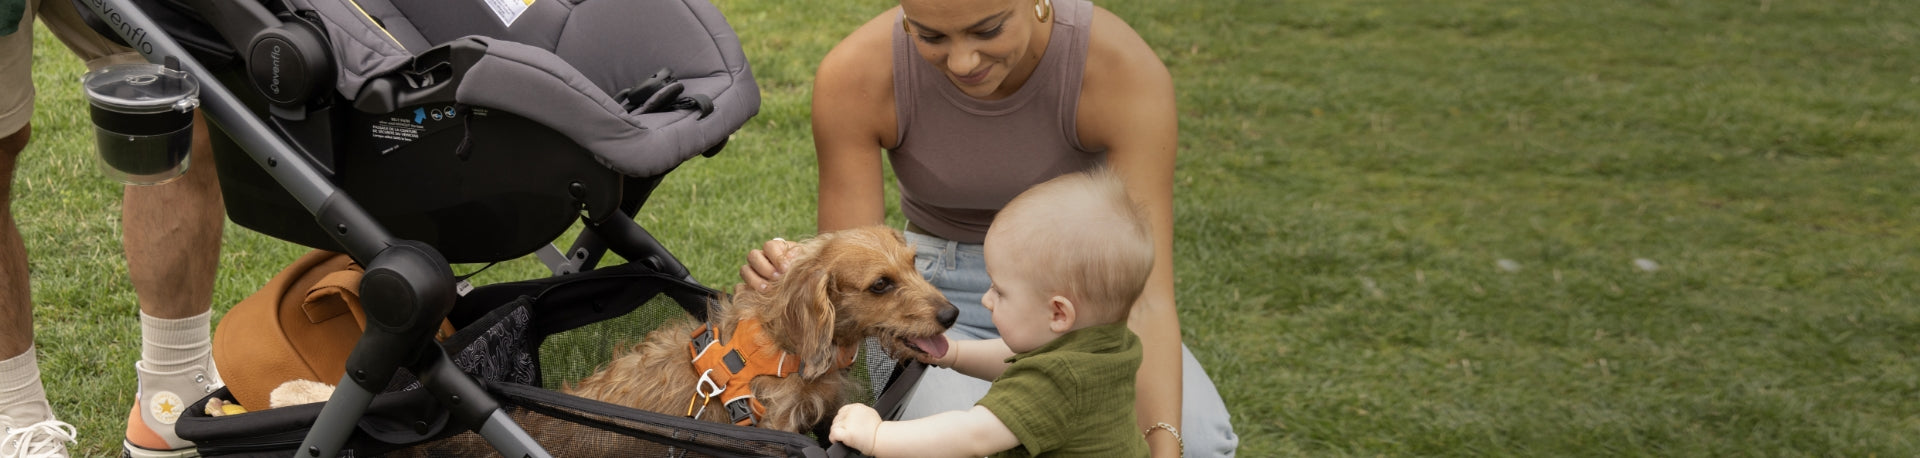 Image of child playing with a dog in Pivot Troop